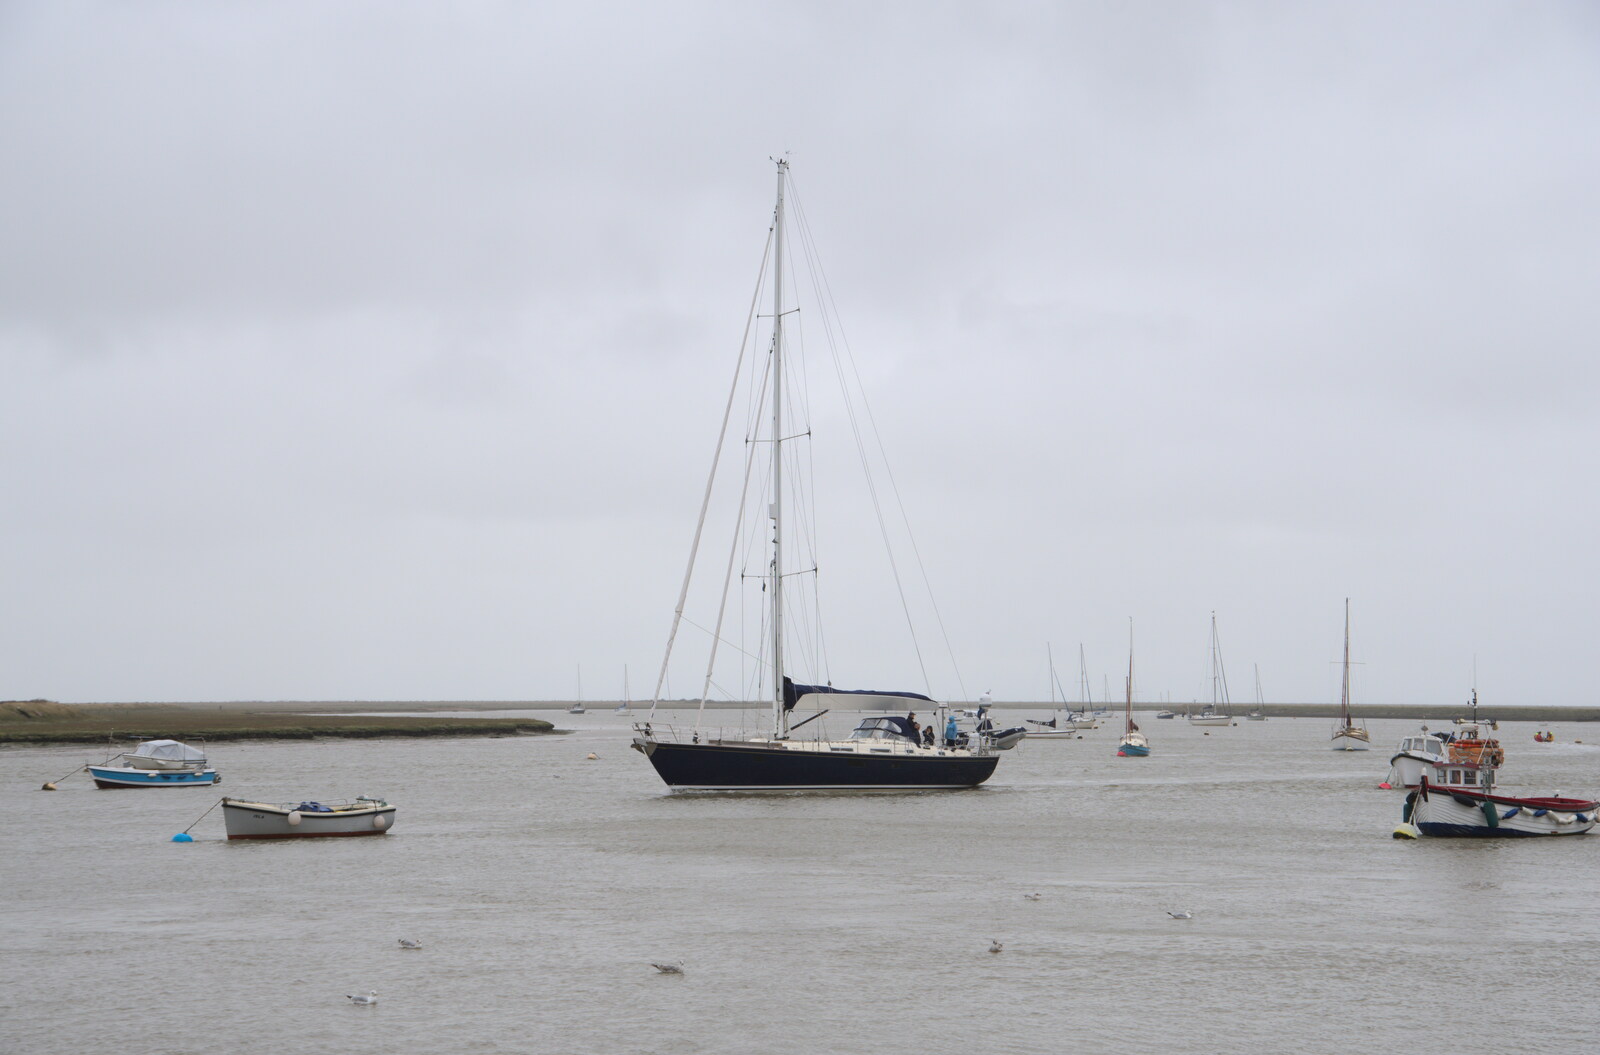 A boat on the river from A Trip to Orford, Suffolk - 29th August 2020